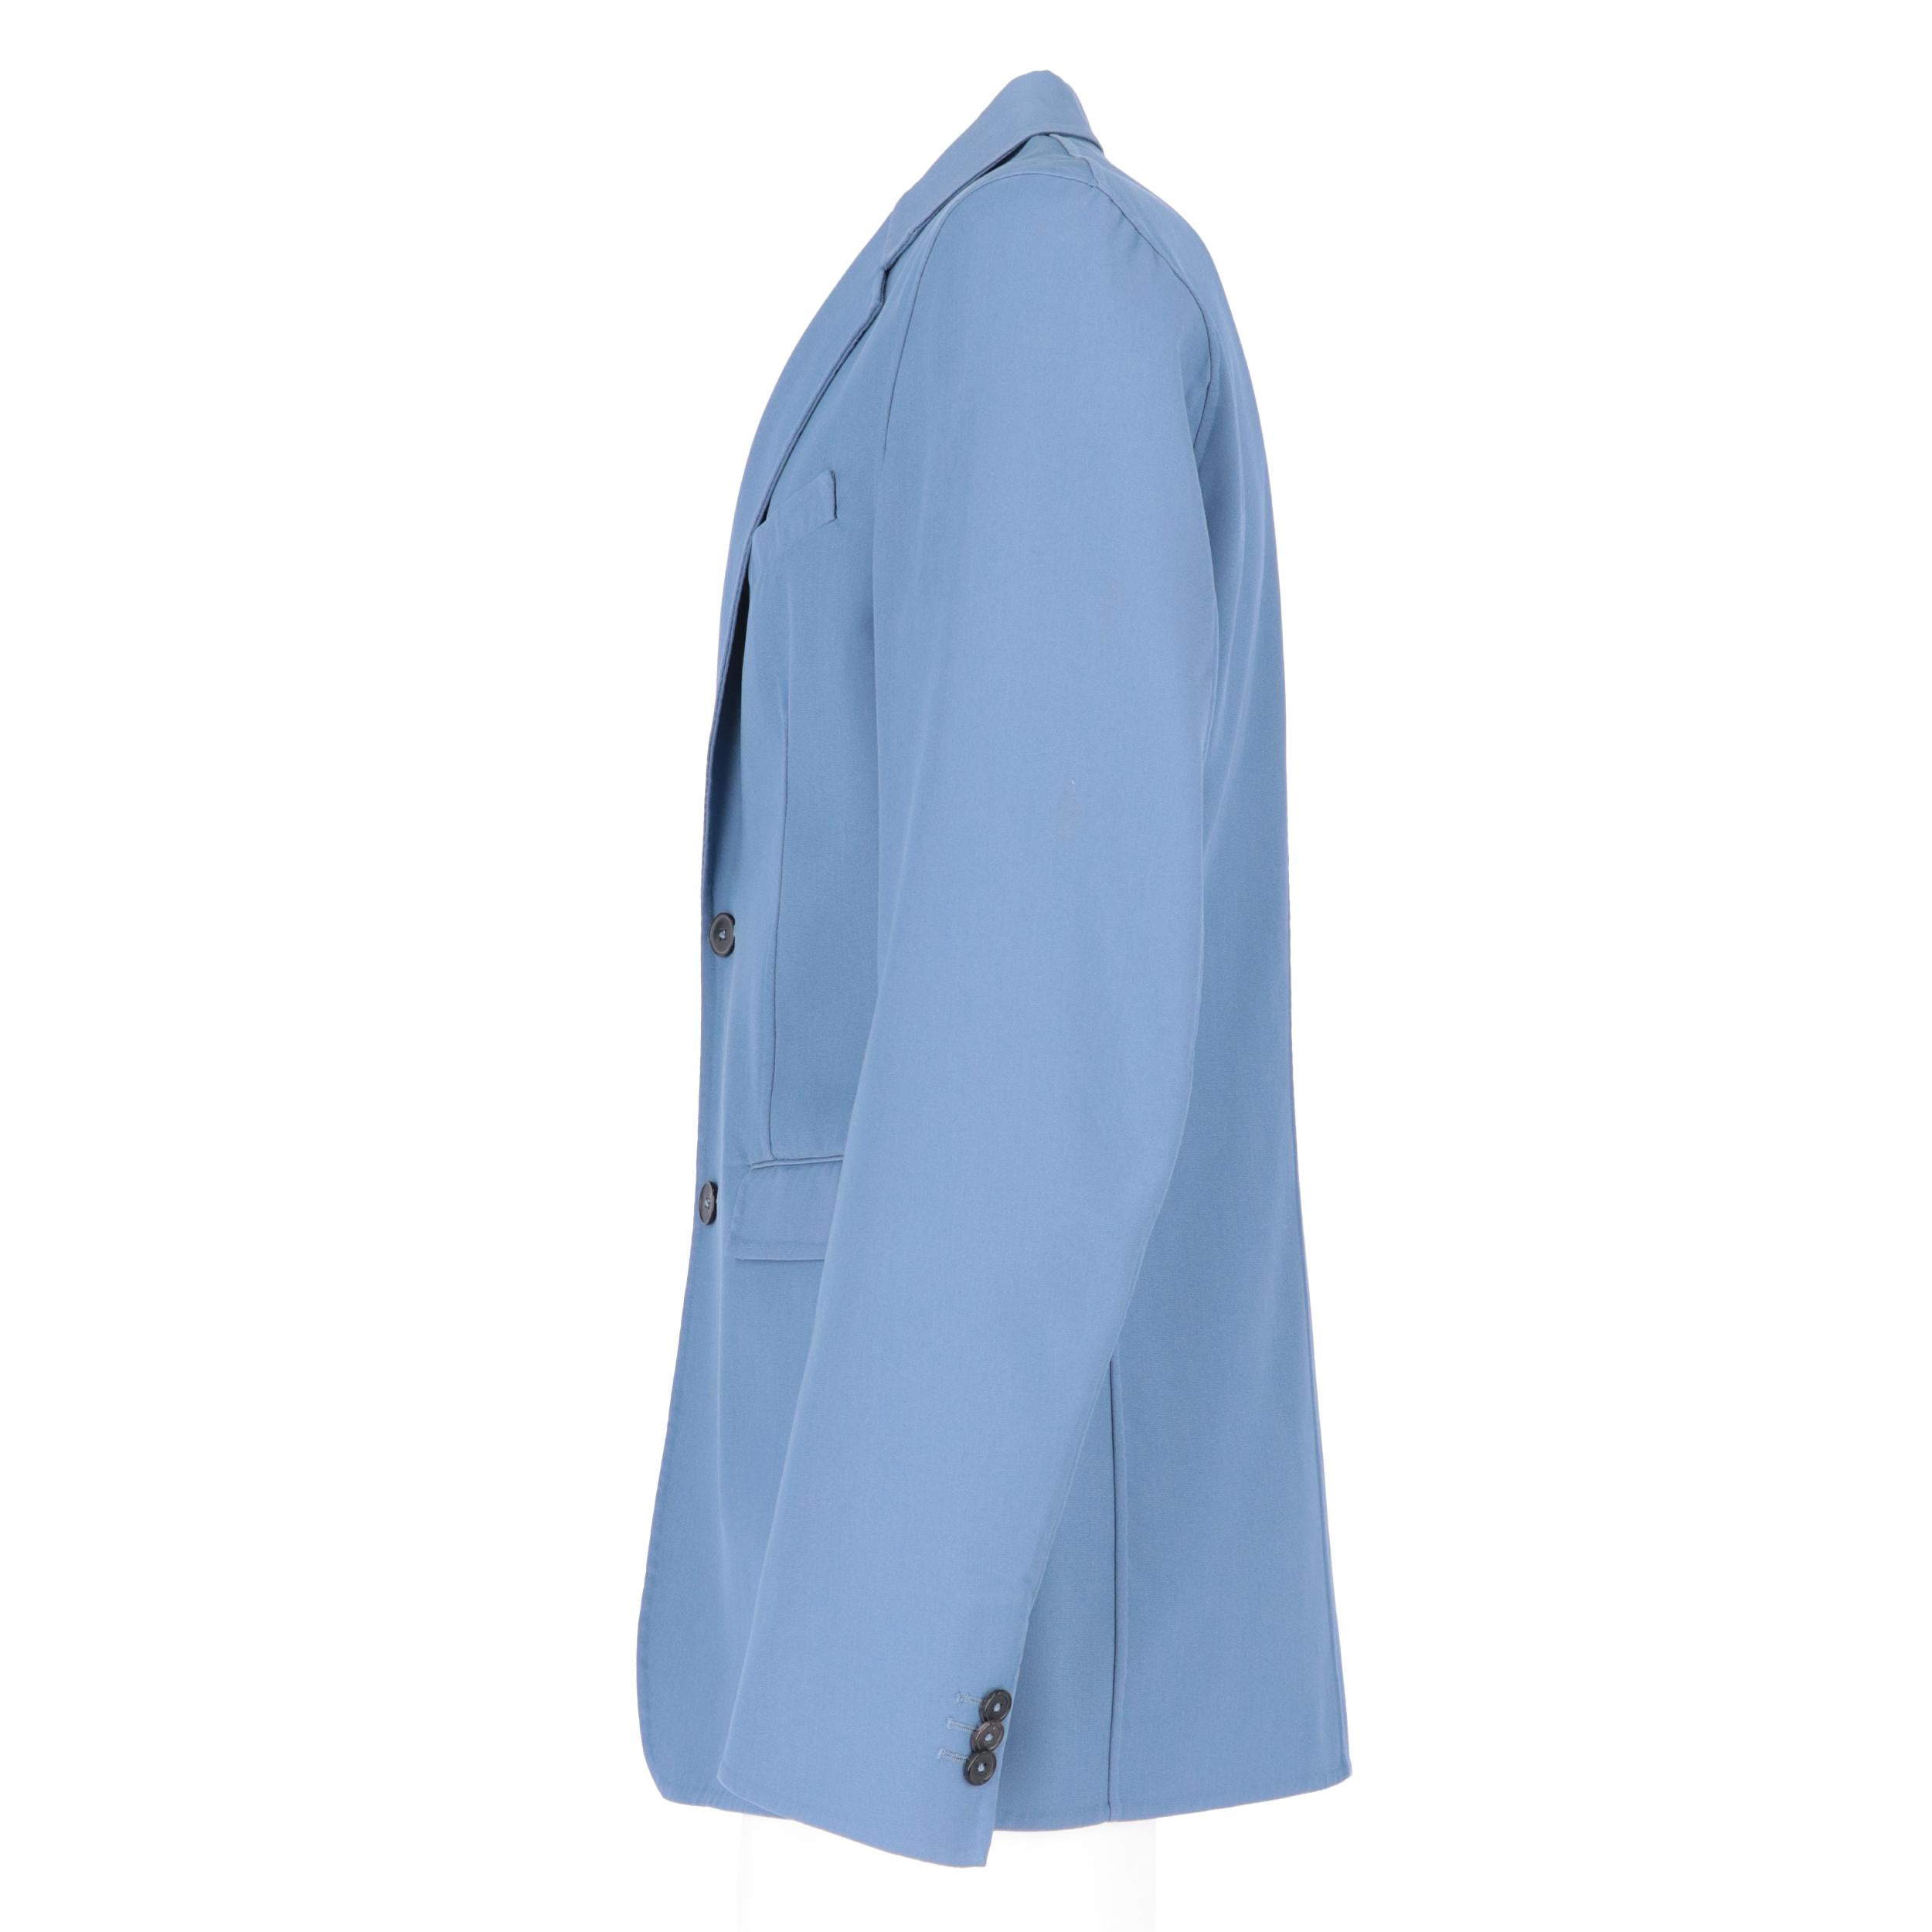 Jil Sander powder blue jacket. Classic lapel collar, front closure with buttons and long sleeves.
Years: 2017

Made in Italy

Size: 48 IT

Flat measurements

Height: 74 cm
Bust: 52 cm
Shoulder: 44 cm
Sleeve: 67 cm